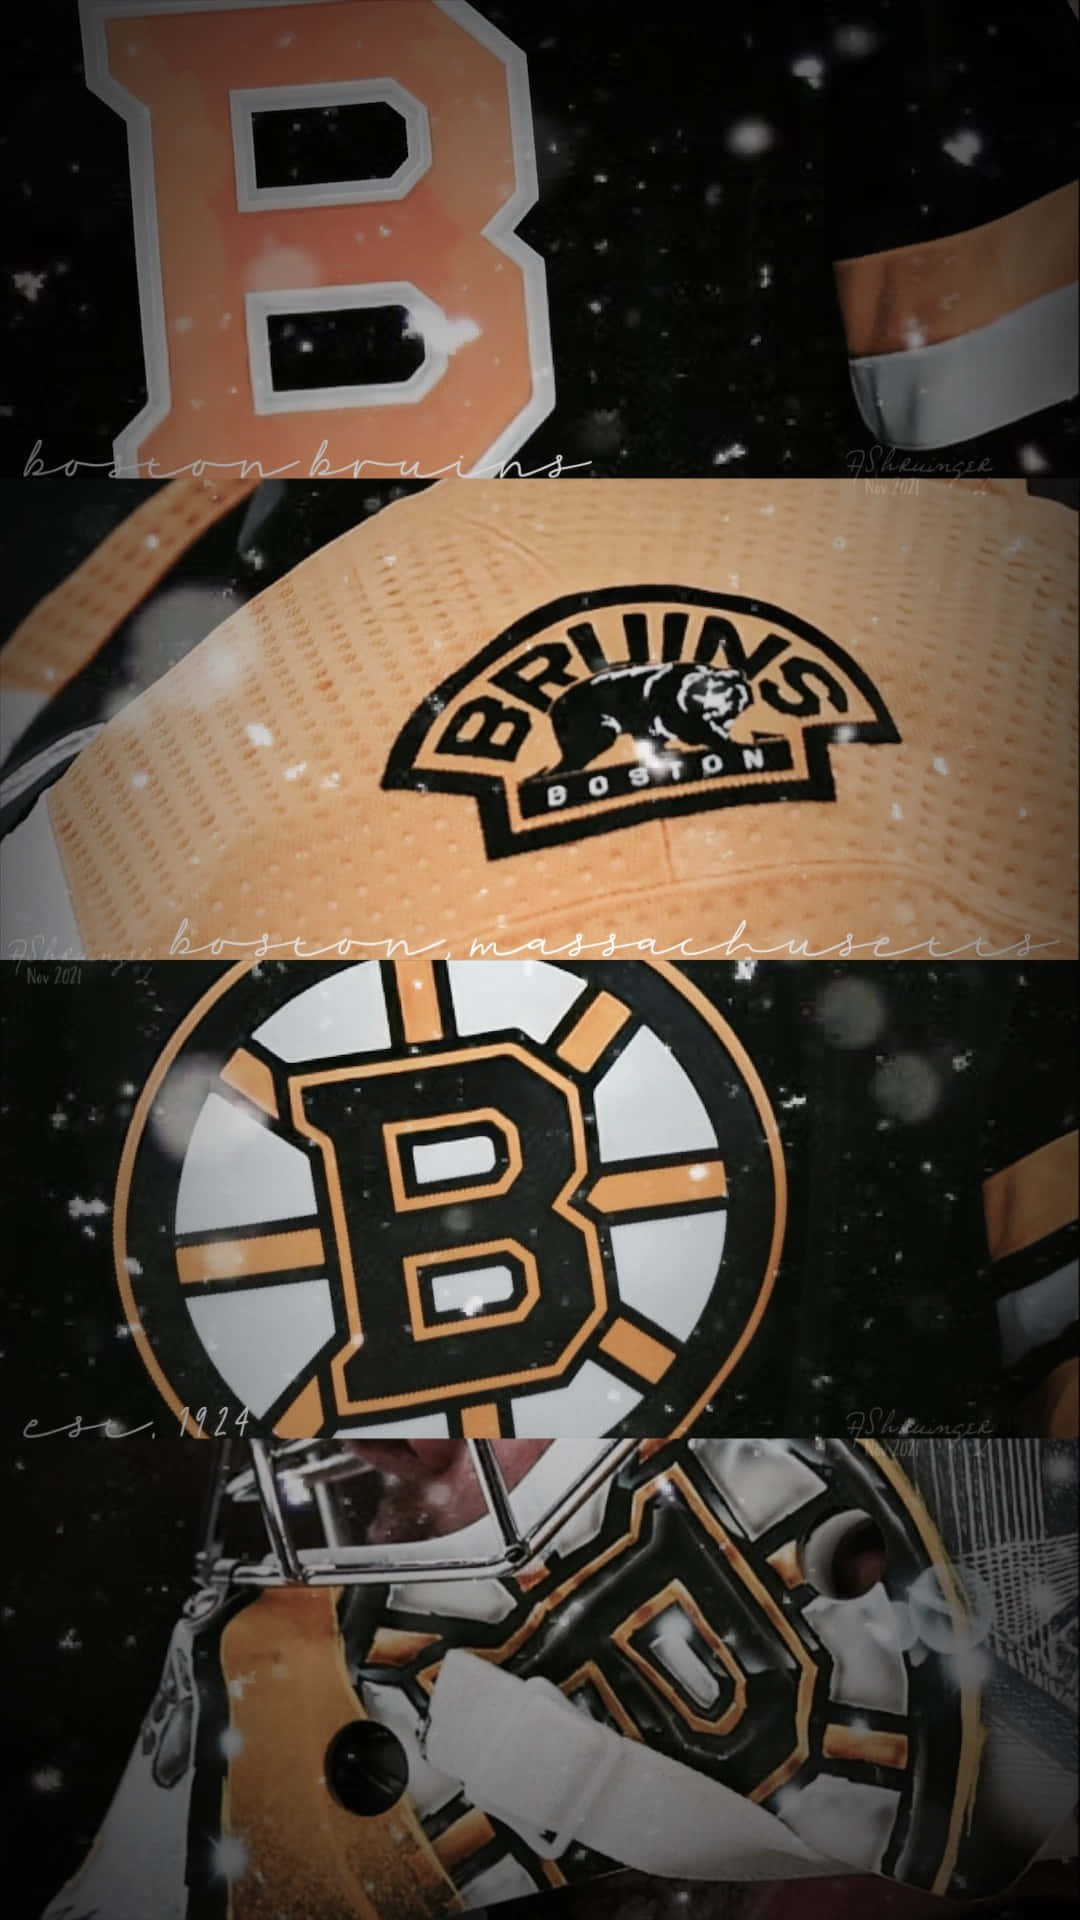 The Boston Bruins bring years of success to the ice